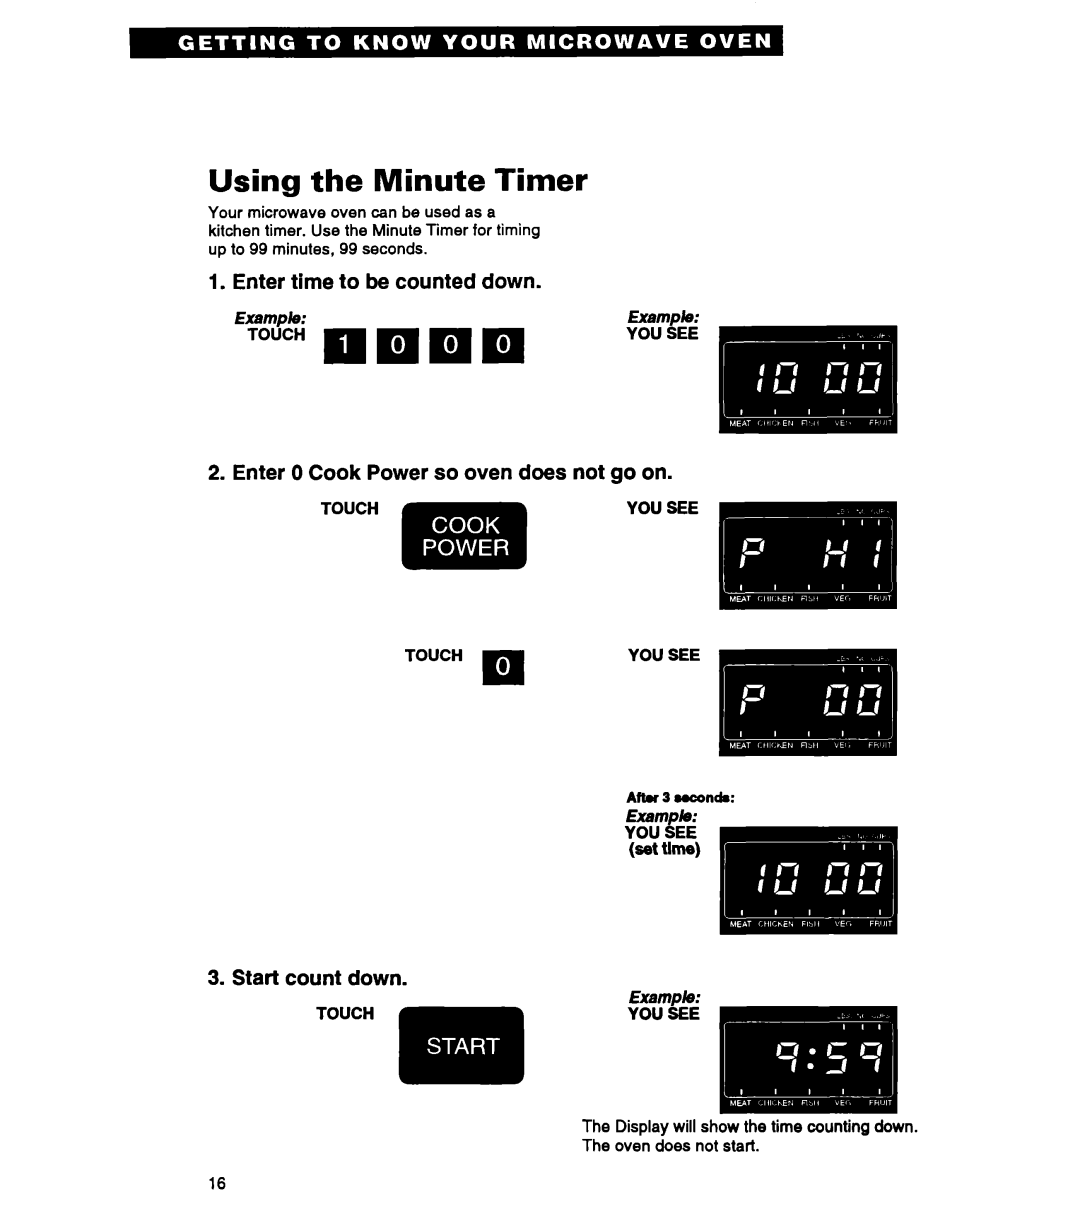 Whirlpool MT2070XAB Using the Minute Timer, Enter time to be counted down, Enter 0 Cook Power so oven does not go on 